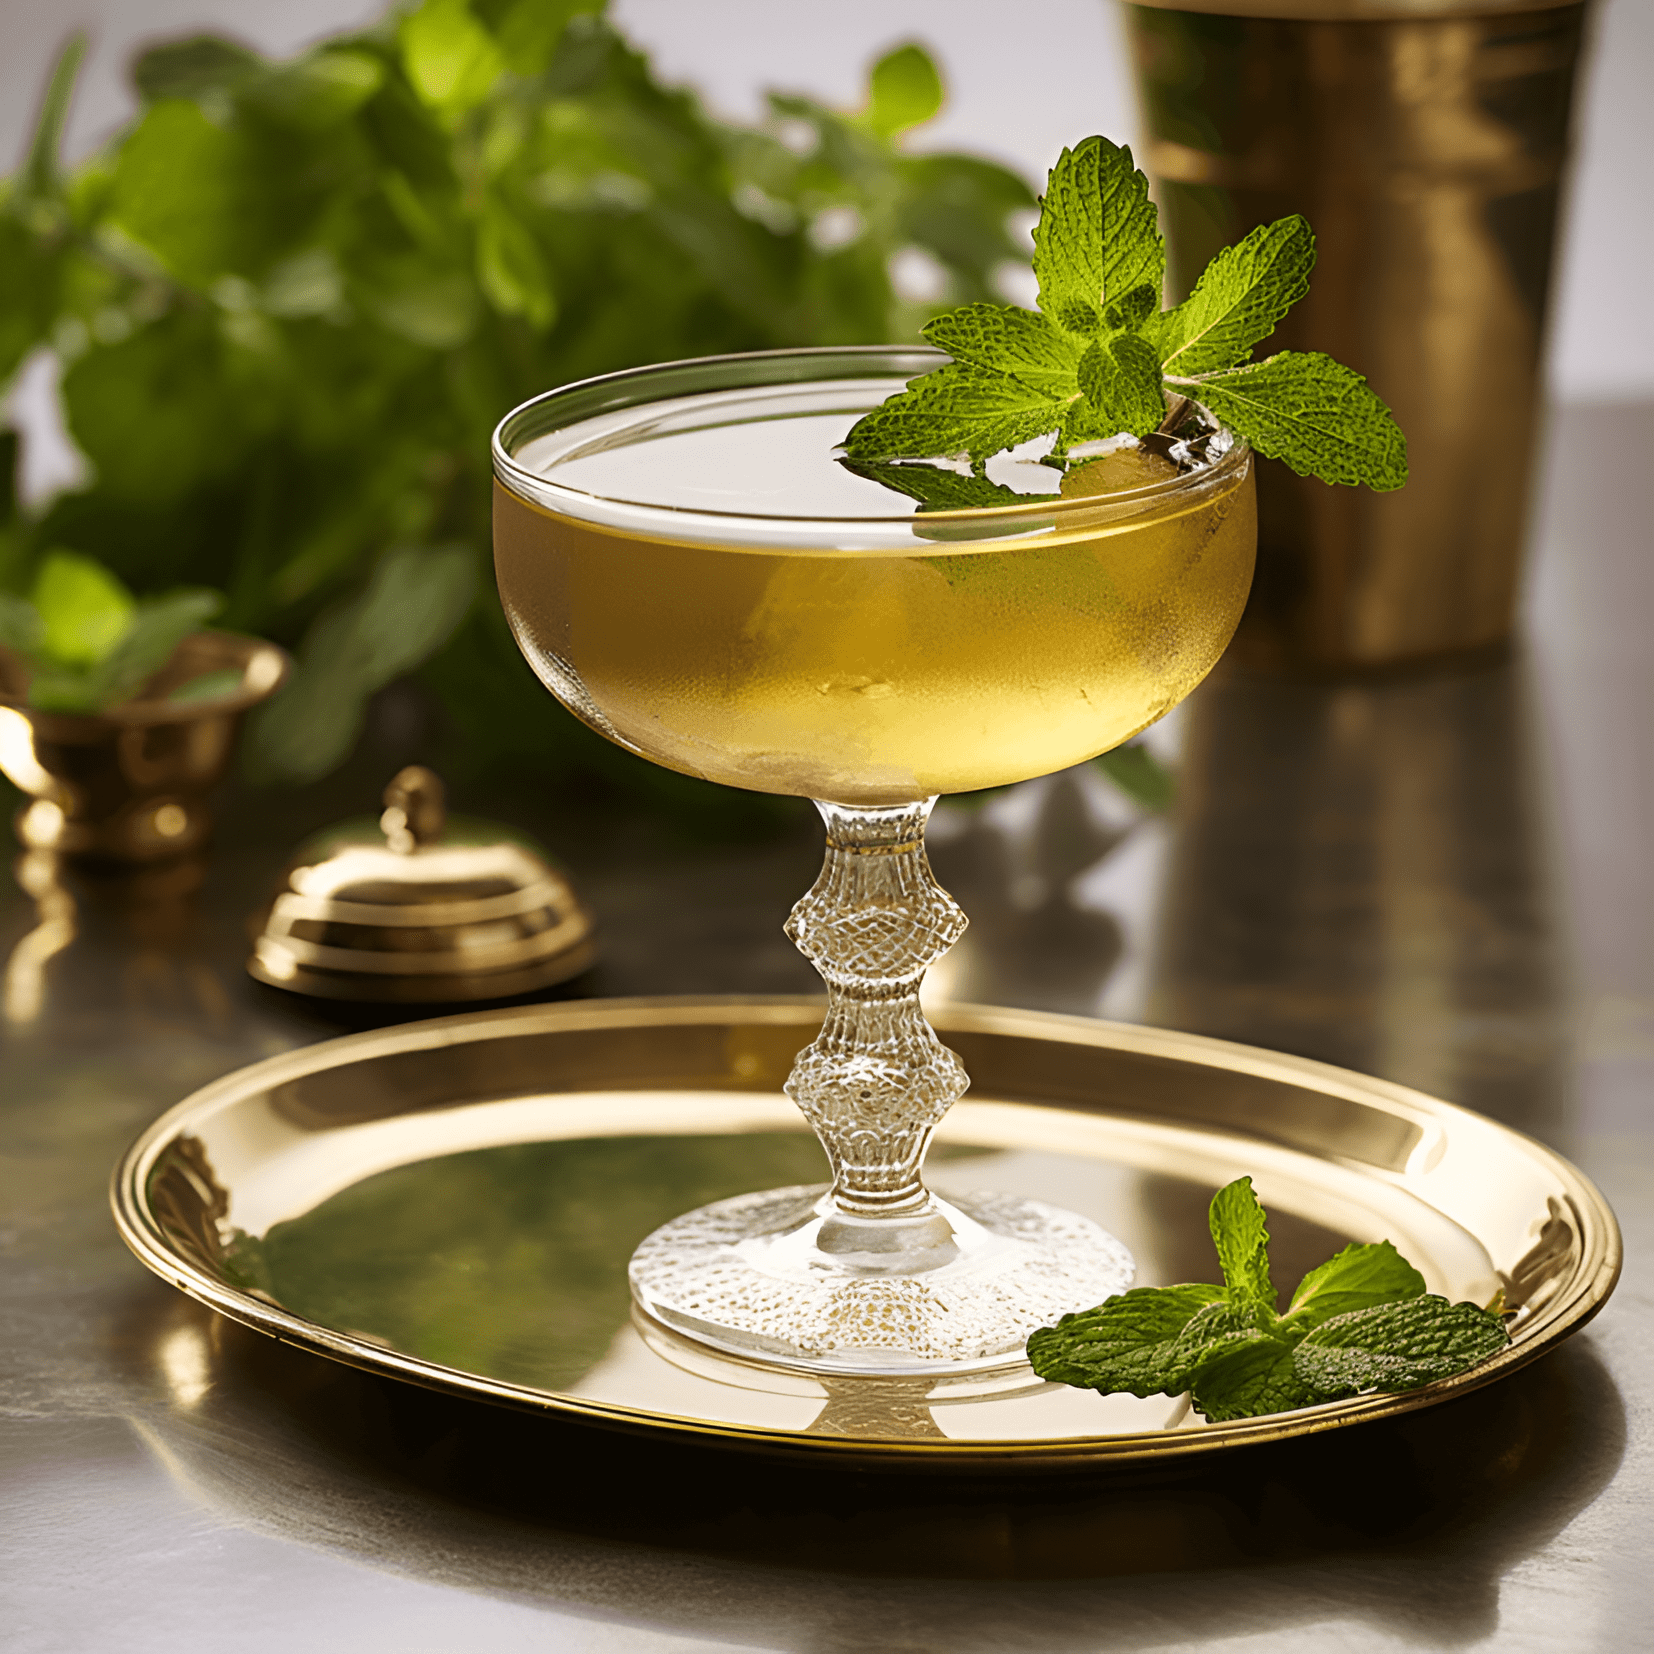 Derby Cocktail Recipe - The Derby cocktail is a well-balanced, refreshing, and slightly sweet drink. It has a strong bourbon base, with a hint of citrus from the lime juice and a touch of sweetness from the sweet vermouth. The mint adds a subtle, cooling undertone, making it a perfect drink for warm weather or outdoor events.